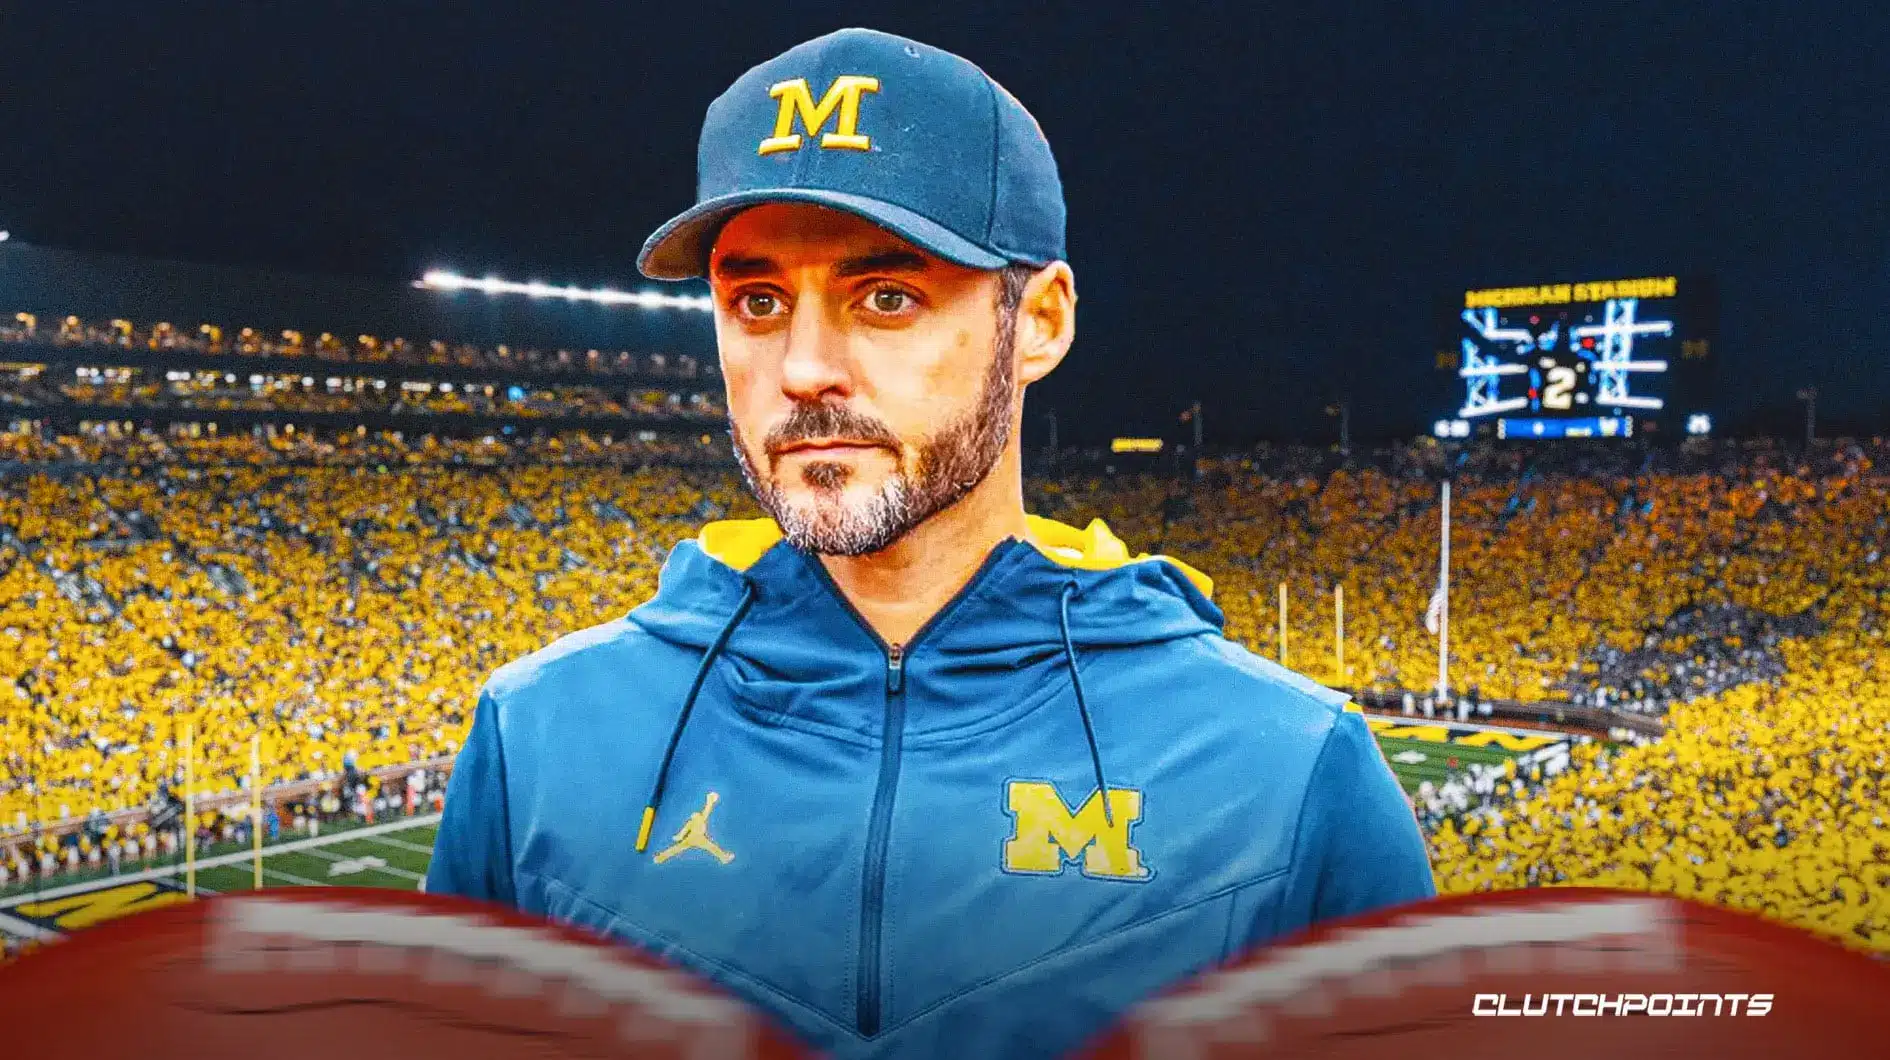 LATEST NEWS: Michigan coach reveal Four bold predictions vs. Alabama in Rose Bowl